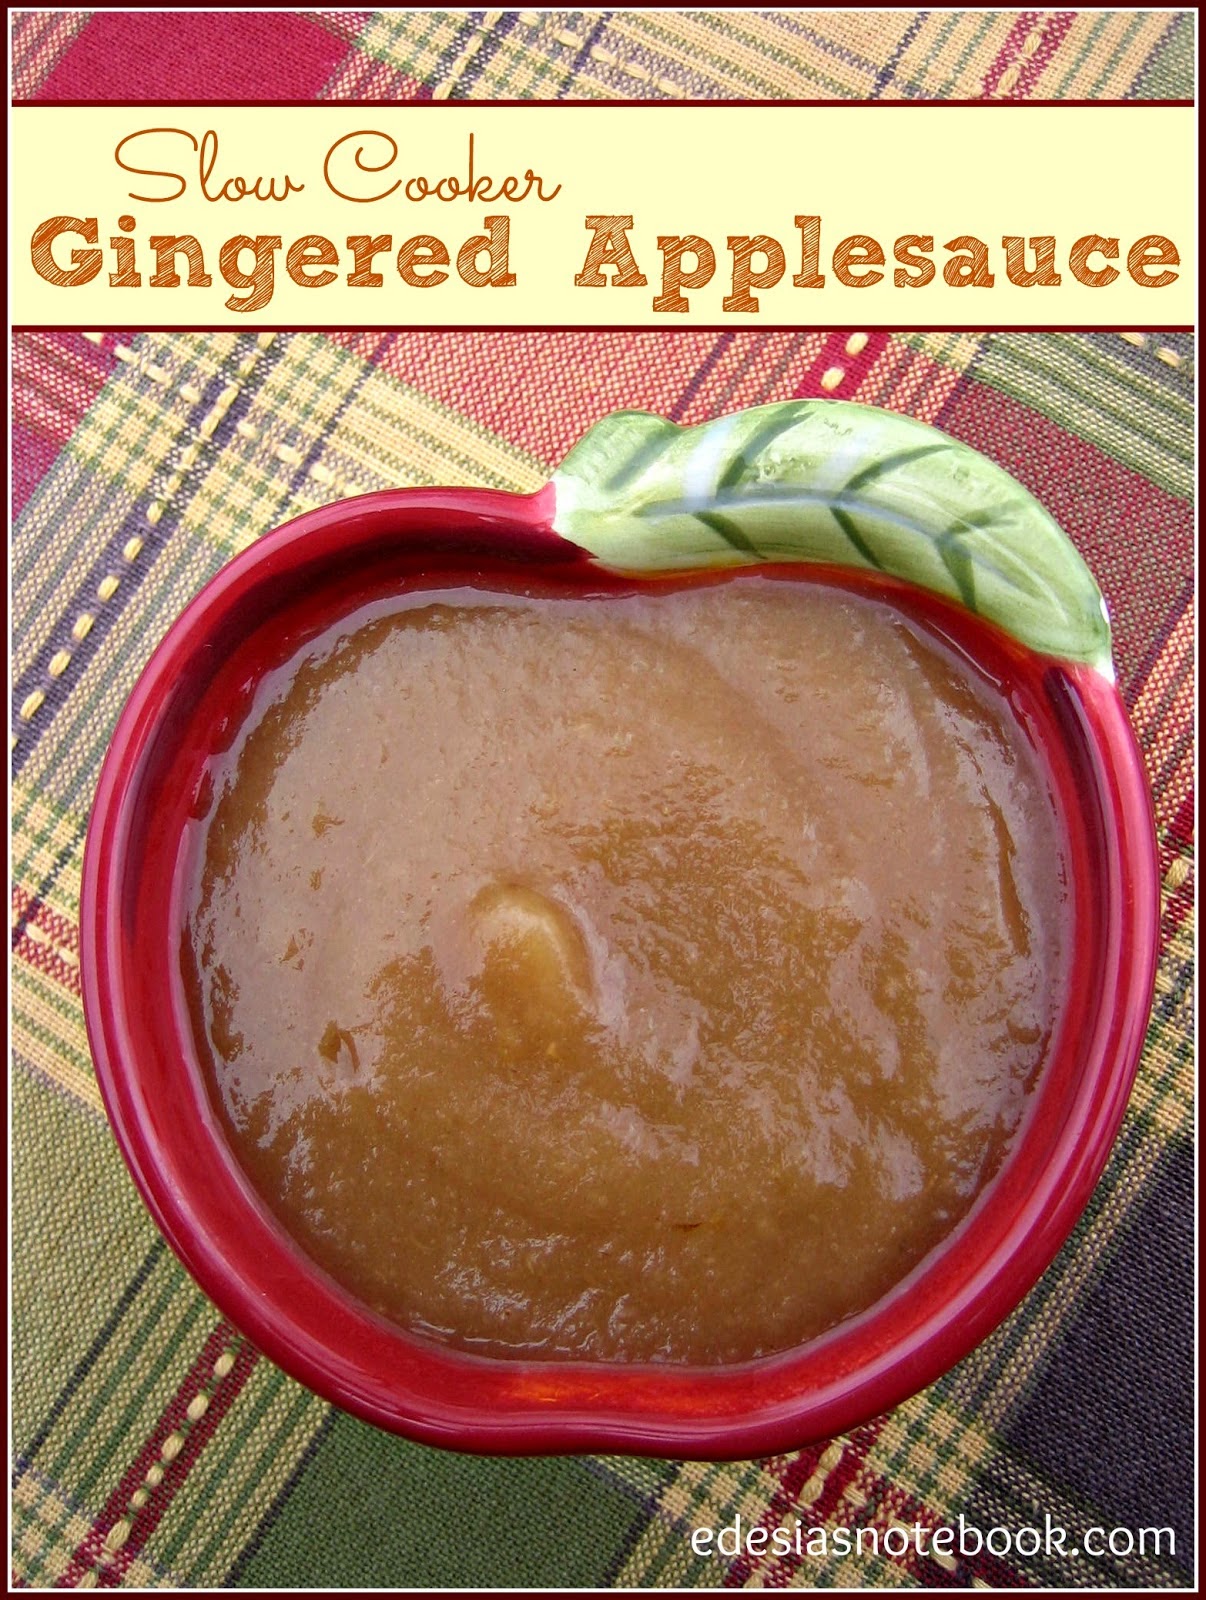 Featured Recipe | Slow Cooker Gingered Applesauce from Edesia's Notebook #SecretRecipeClub #recipe